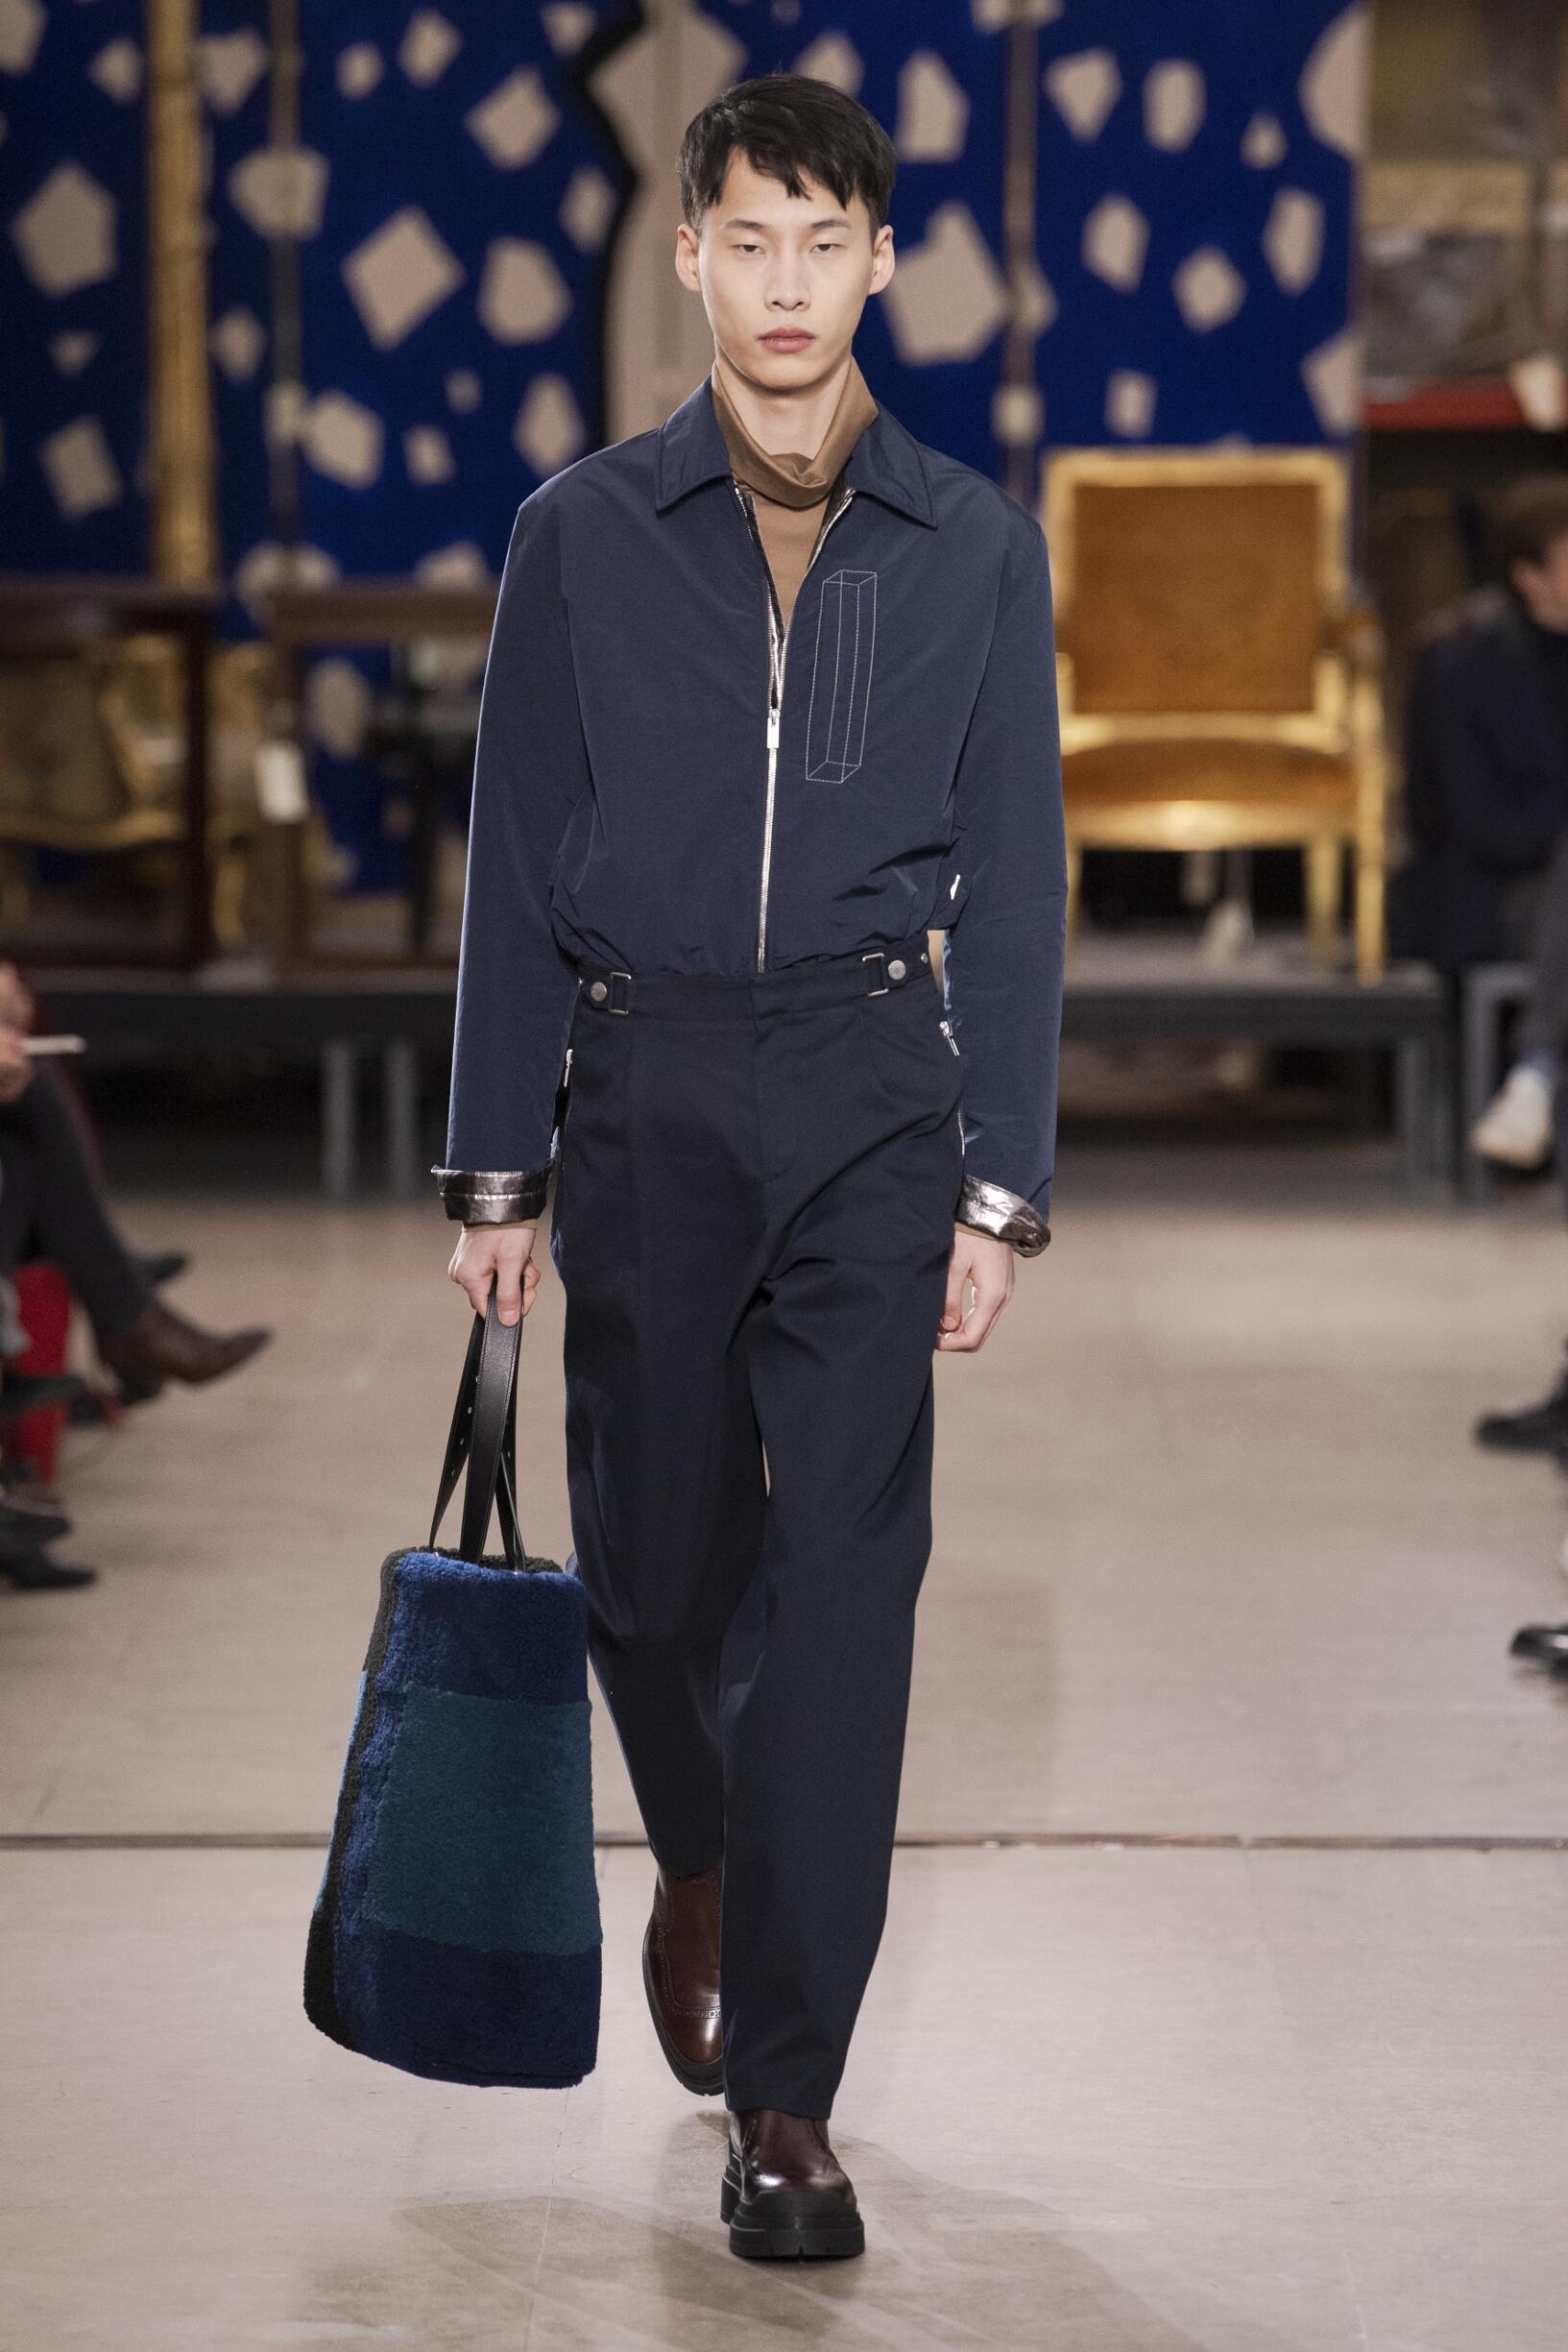 HERMÈS FALL WINTER 2019 MEN’S COLLECTION | The Skinny Beep